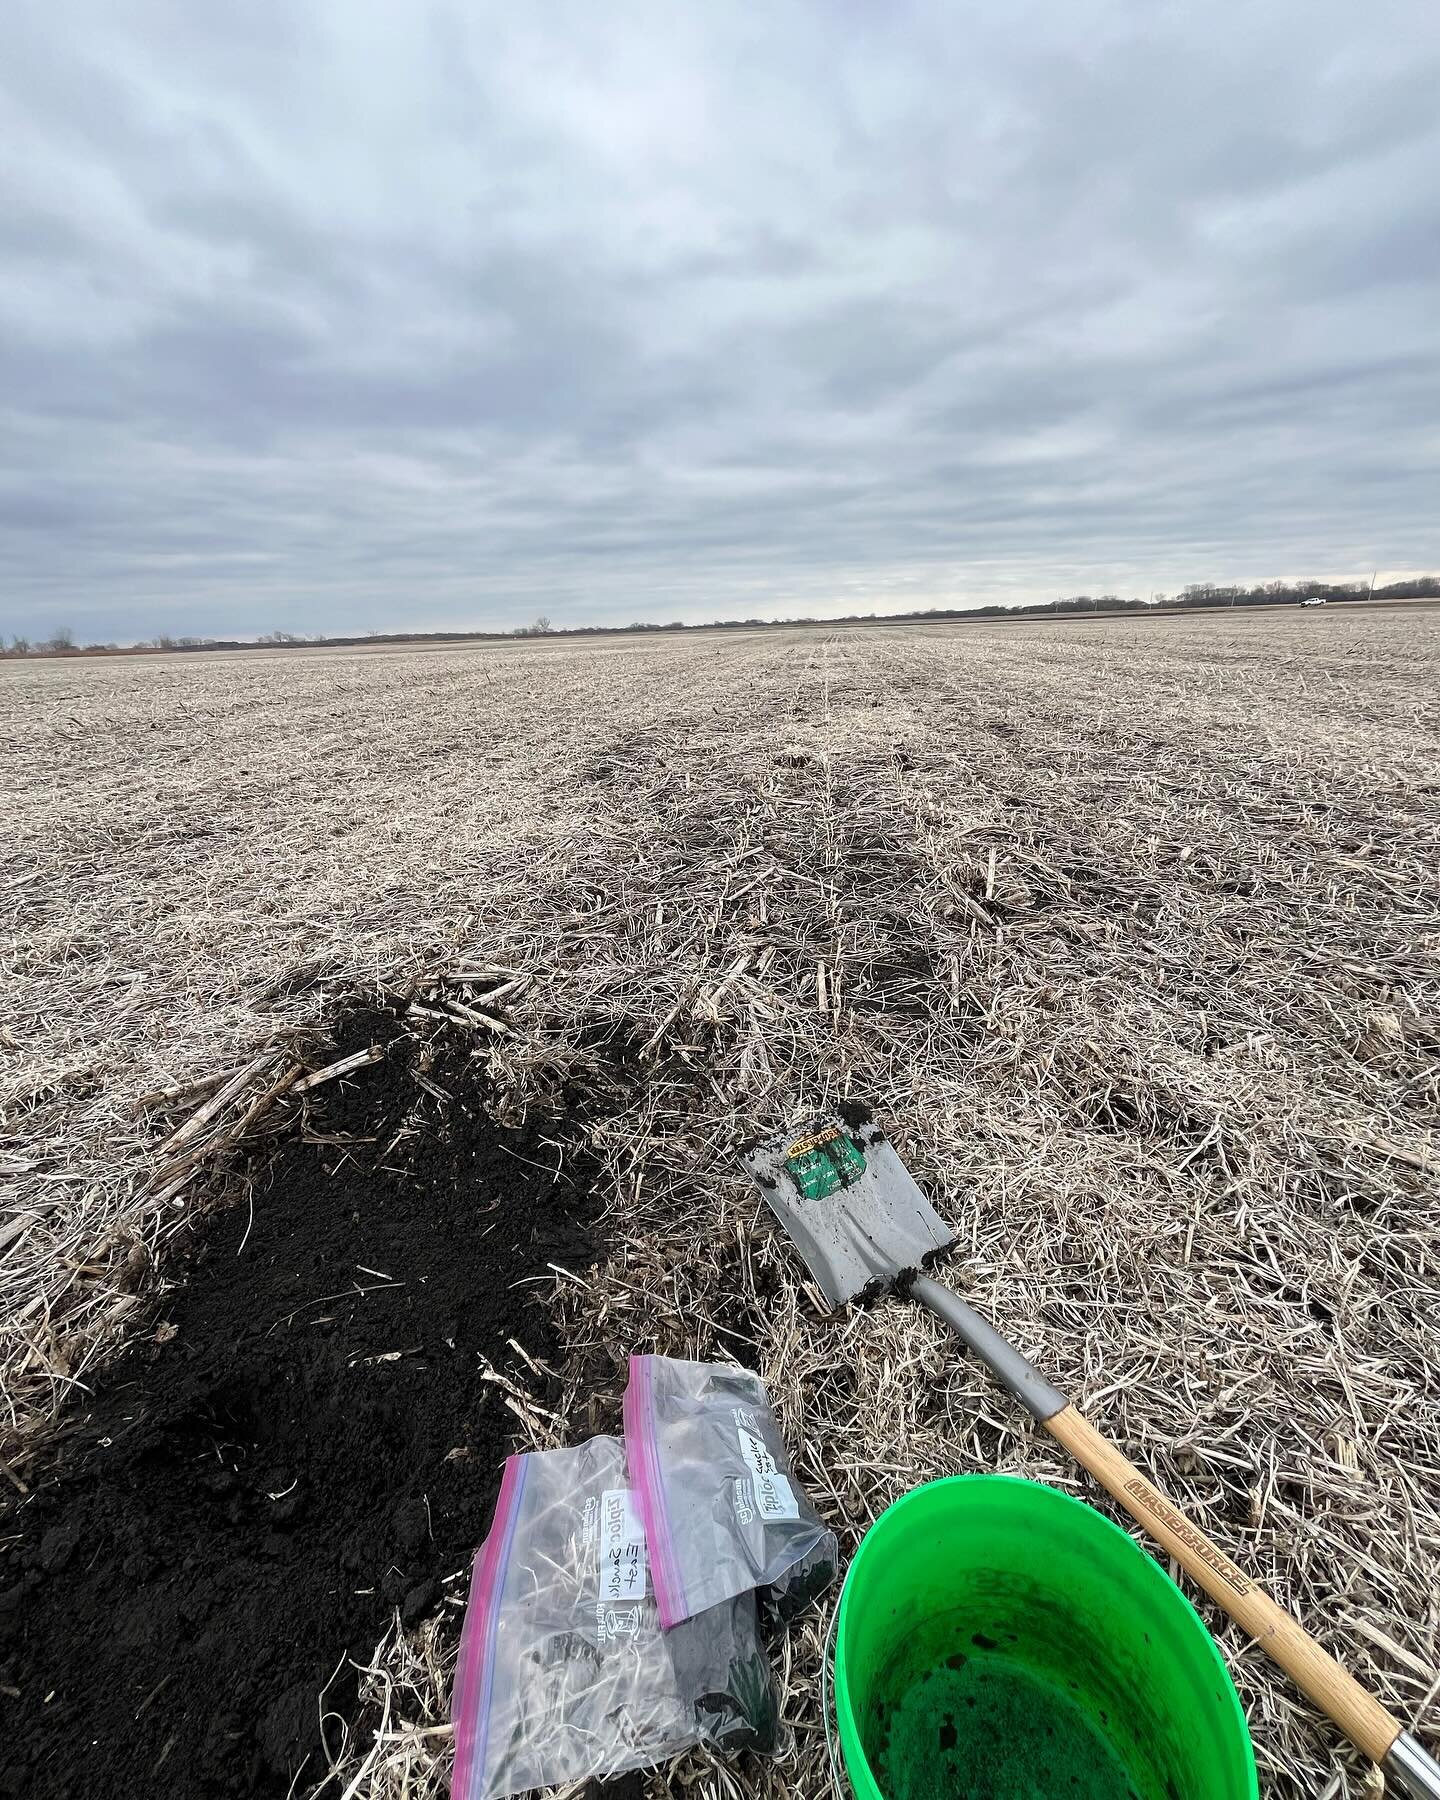 Soil sampling in February is a little unusual but when an opportunity to get ahead of the spring madness comes along we take it!